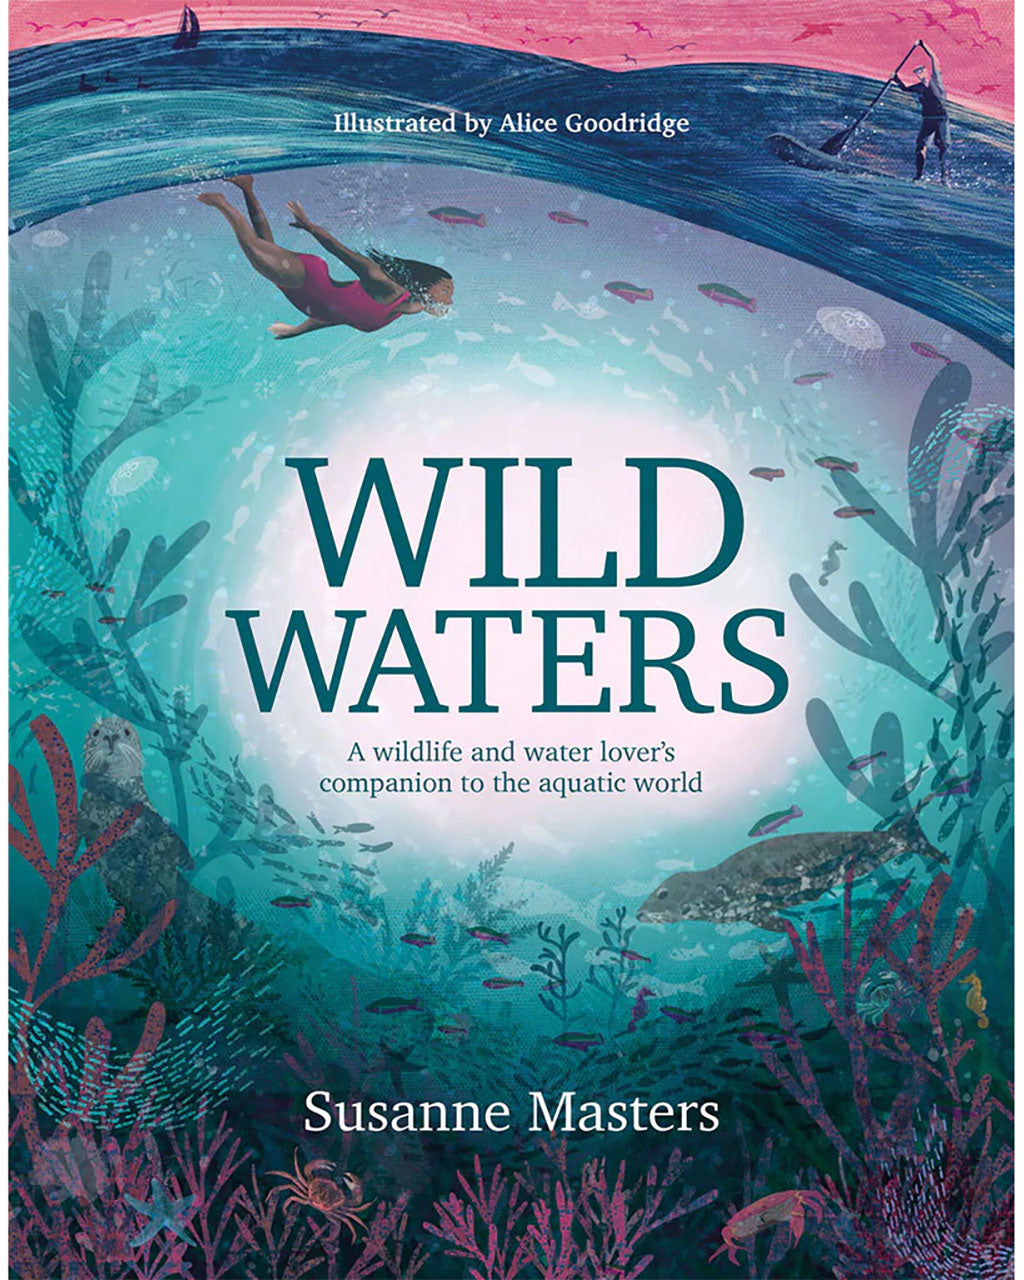 Wild Waters by Susanne Masters